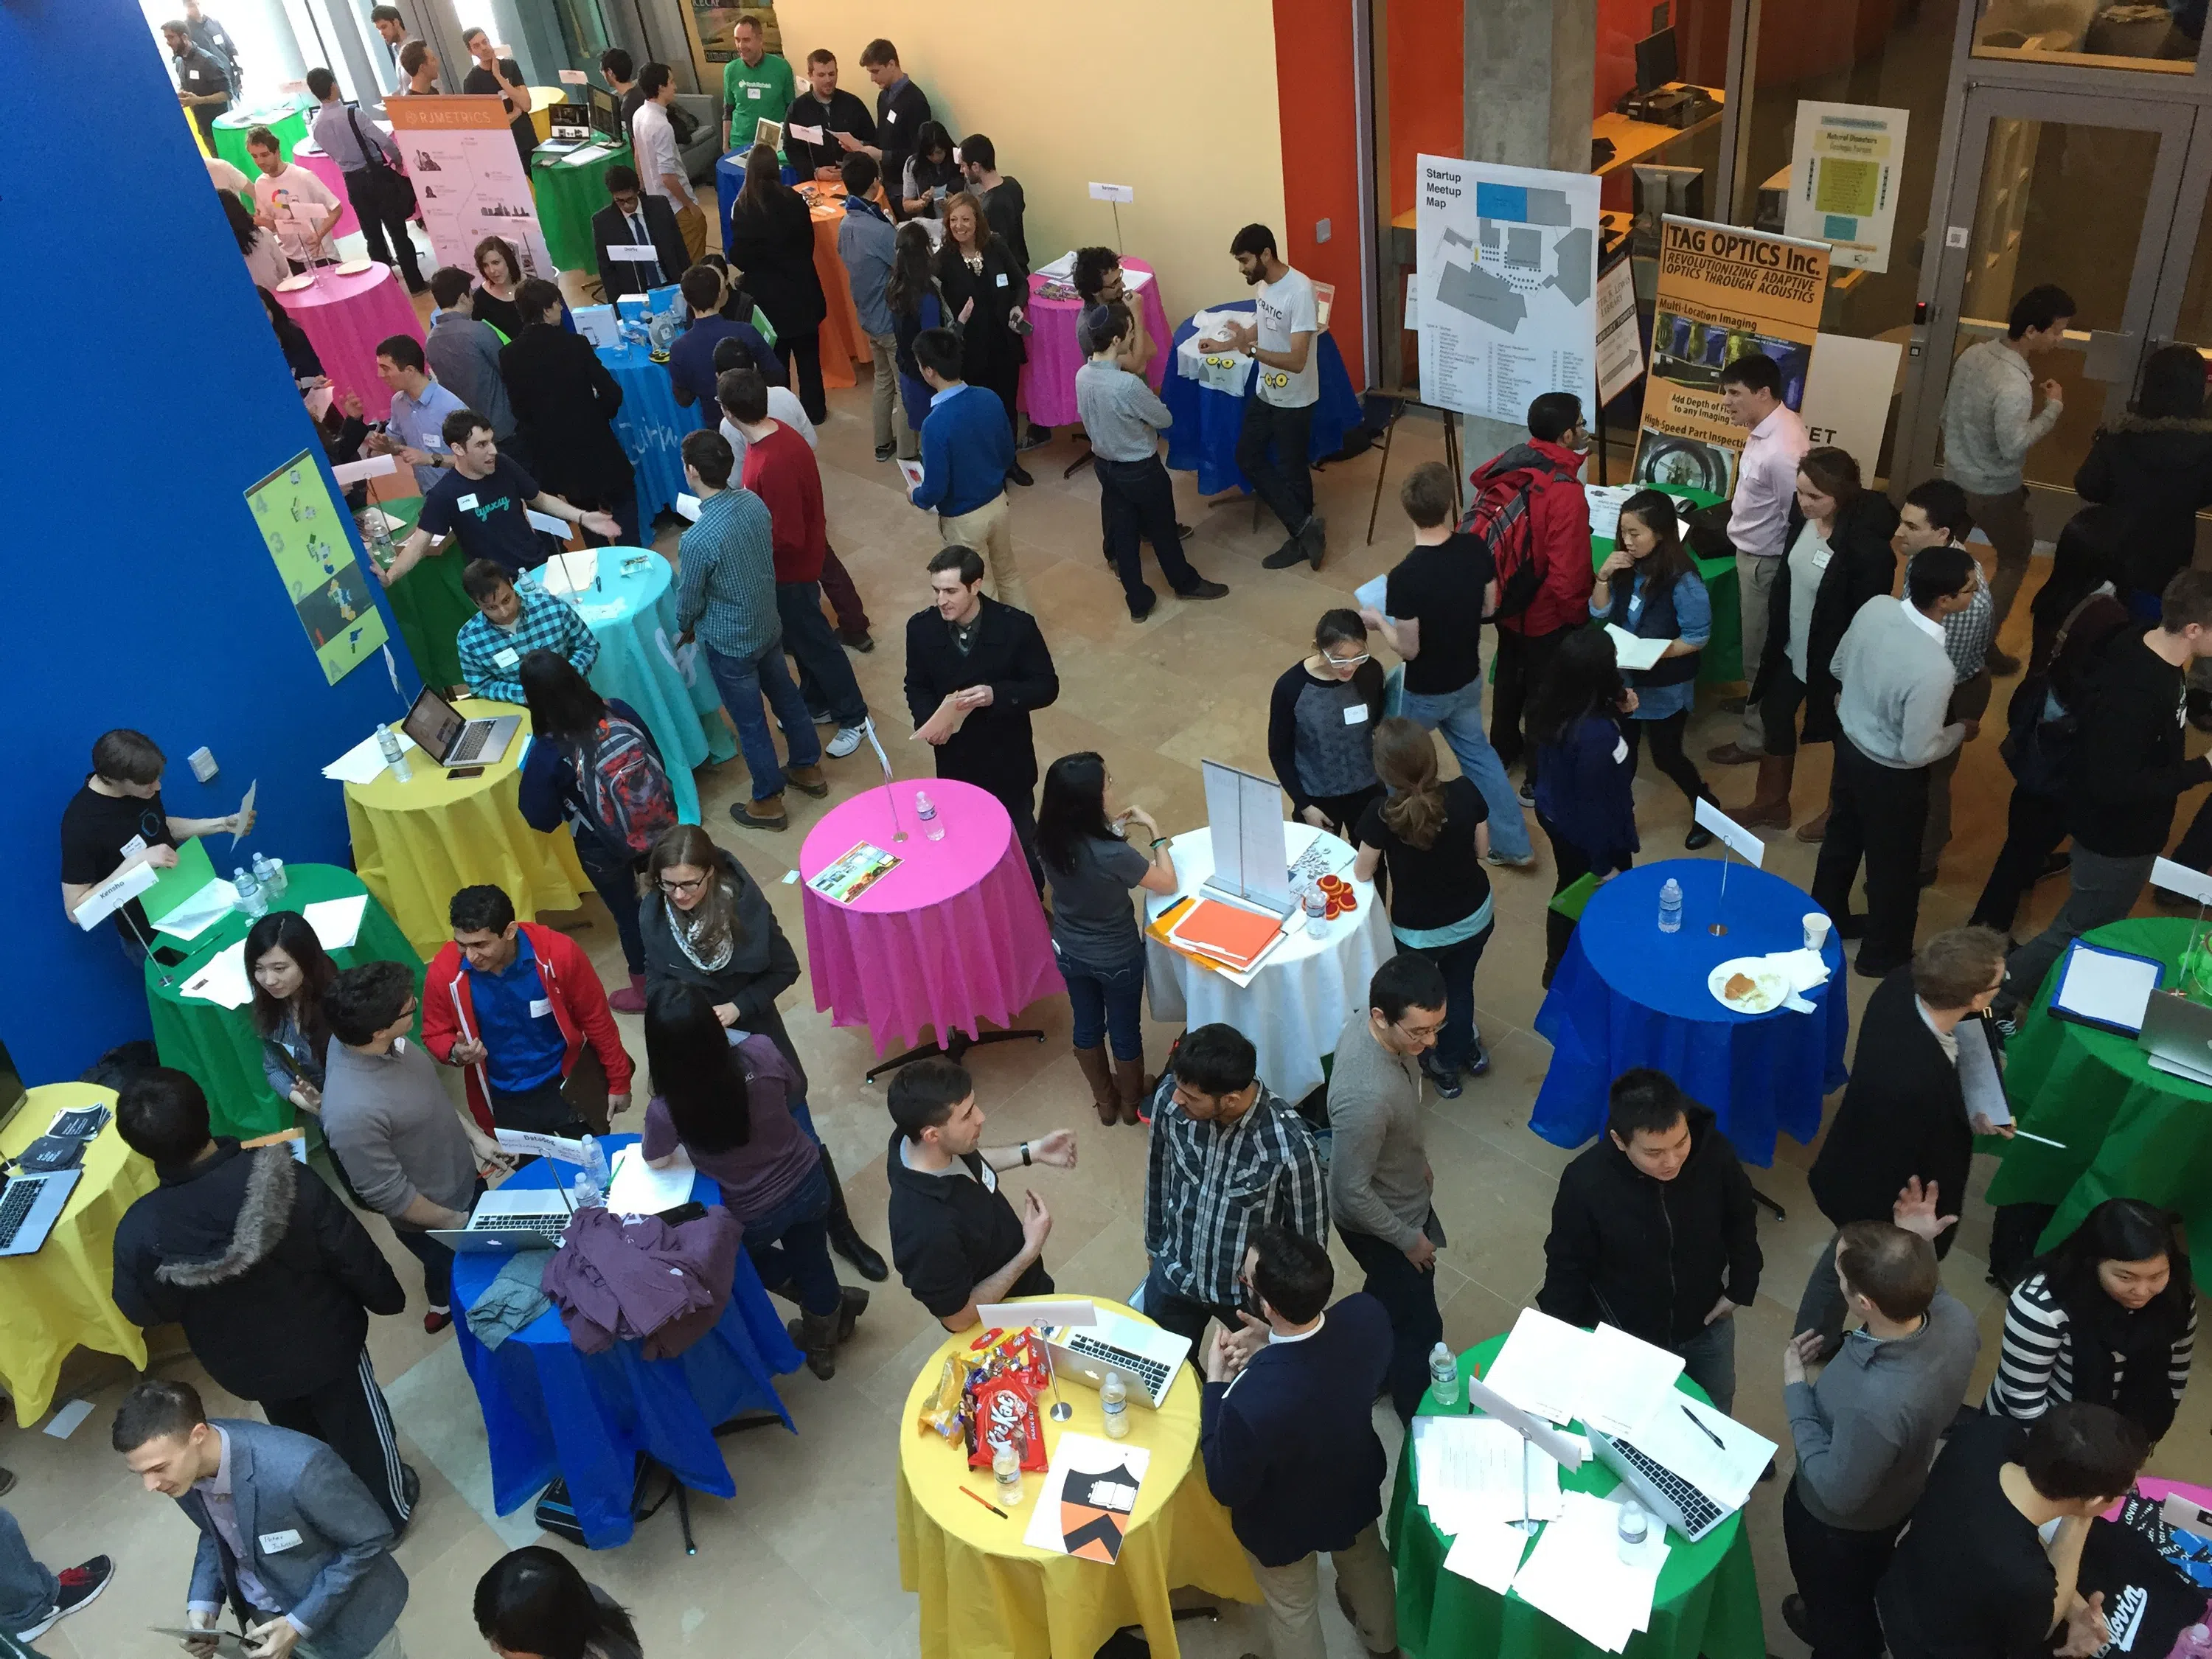 People talking and mingling at the Center for Career Development Startup Fair 